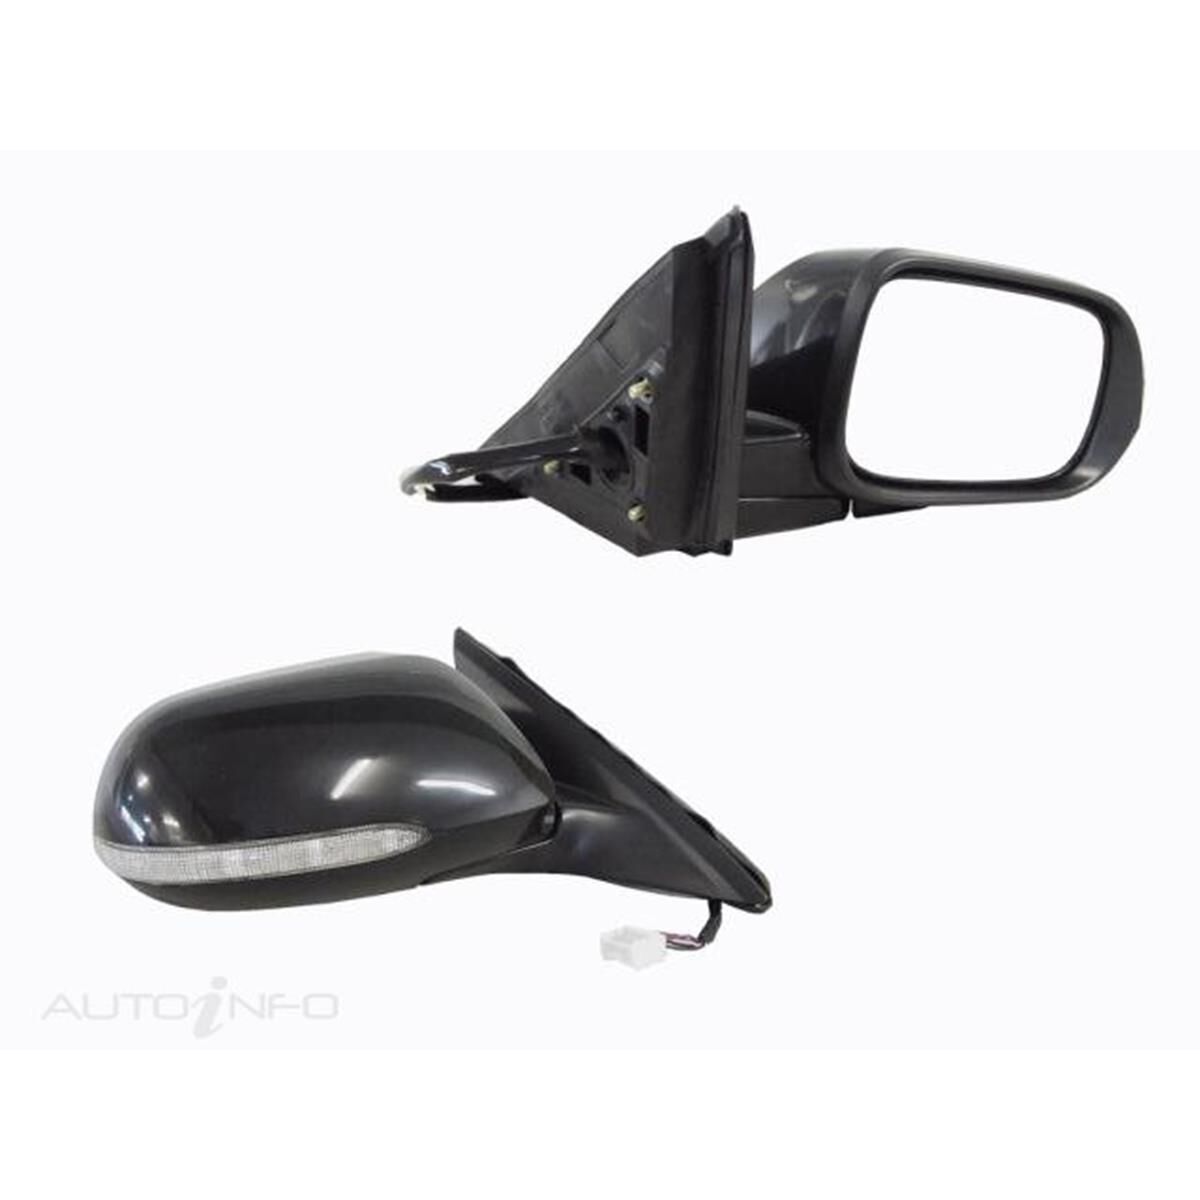 HONDA ACCORD EURO  CL  07/2003 ~ 01/2008  ELECTRIC DOOR MIRROR  RIGHT HAND SIDE  COMES WITHBLINKER LIGHT, , scaau_hi-res